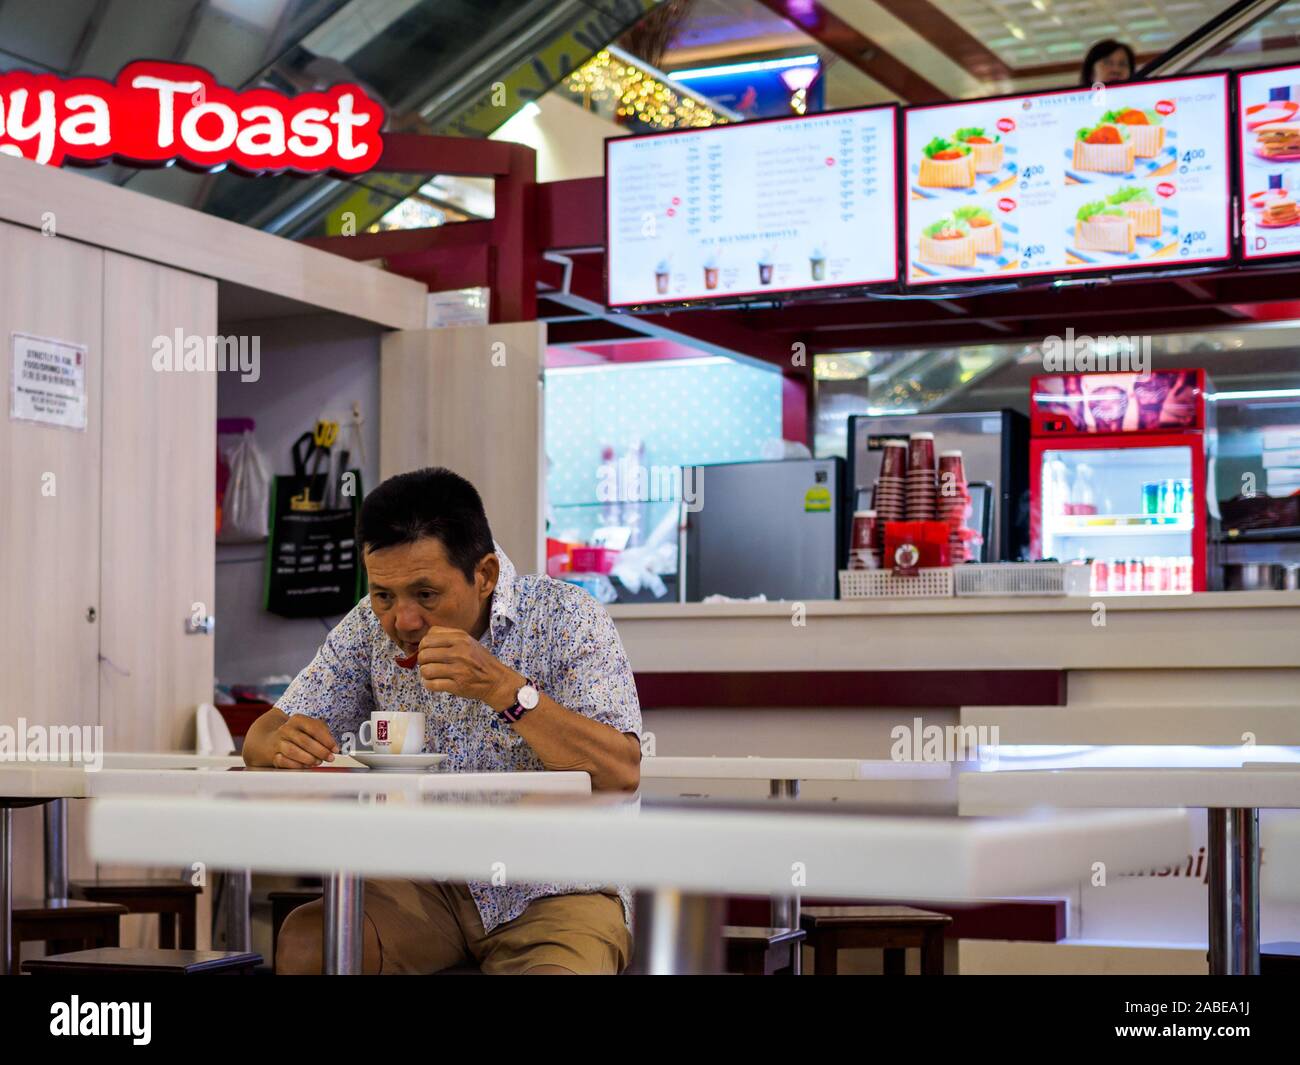 SINGAPORE – 9 MAY 2019 – Middle aged Asian Chinese Singaporean man drinks coffee with a spoon alone at a Ka Yun Kaya Toast cafe. With copy space. Stock Photo